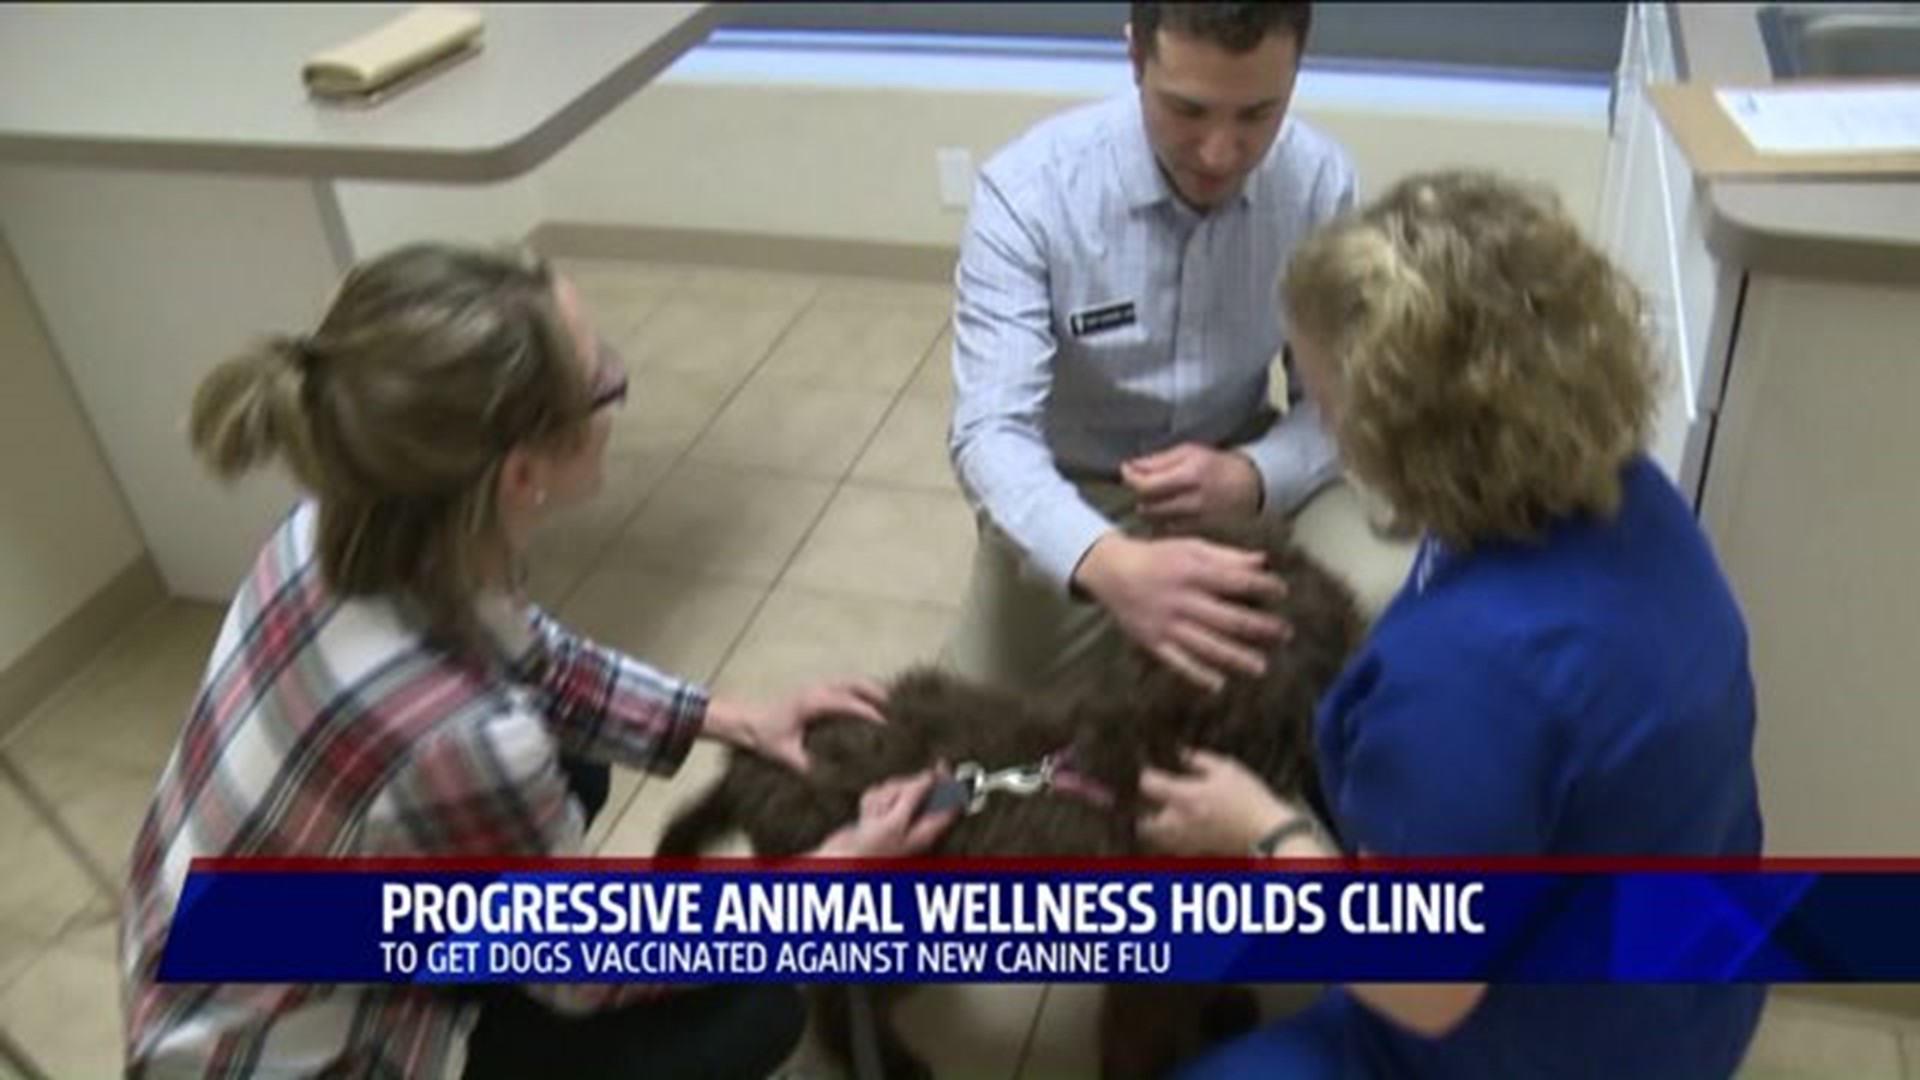 New strain of the dog flu leads vets to recommend vaccines 